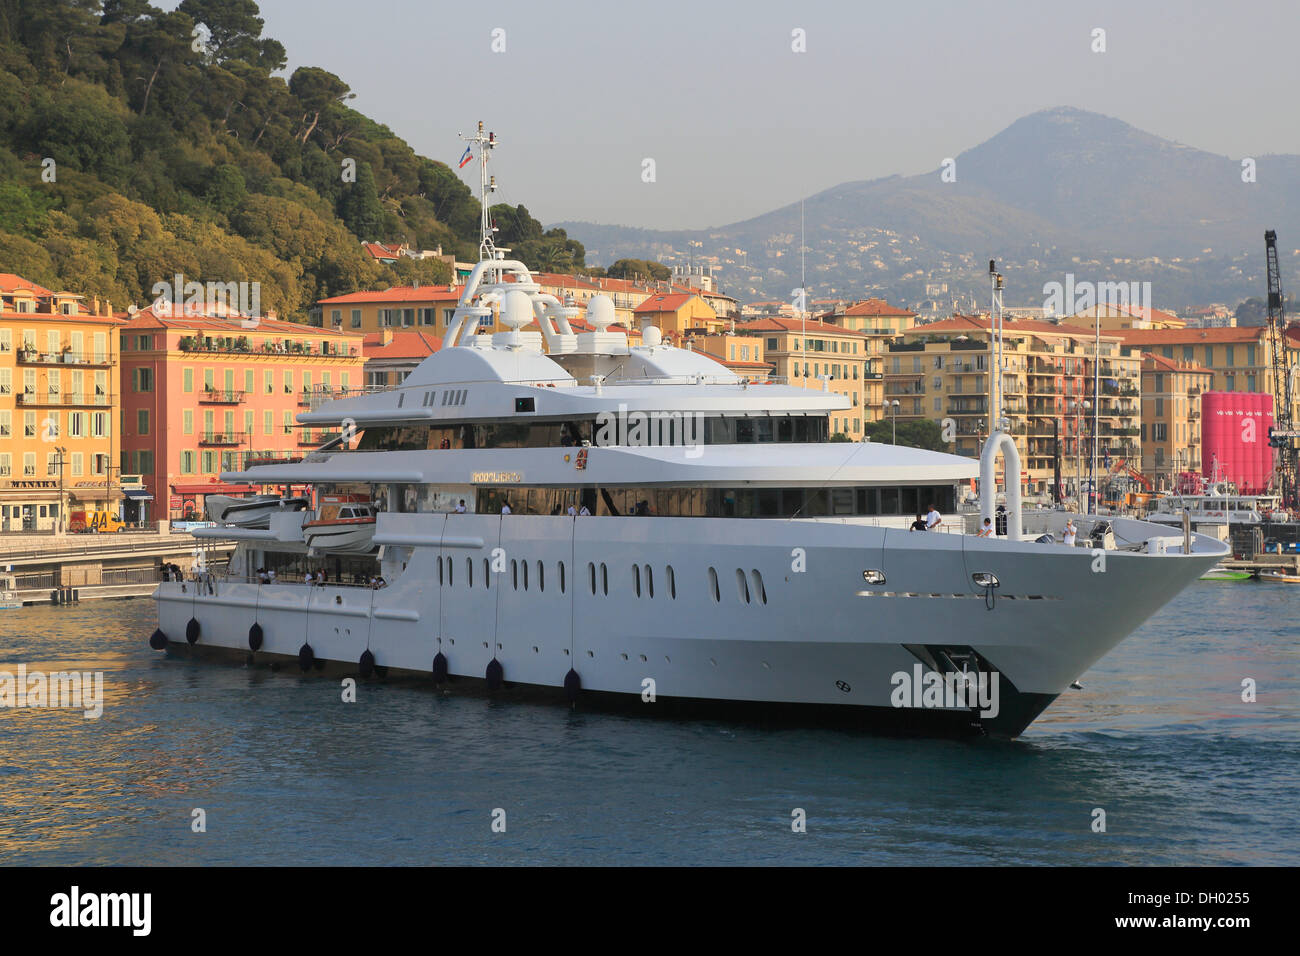 Moonlight II motor yacht, built by Neorion, length: 85.30 m, built in 2005, arriving in the port of Nice, French Riviera, France Stock Photo